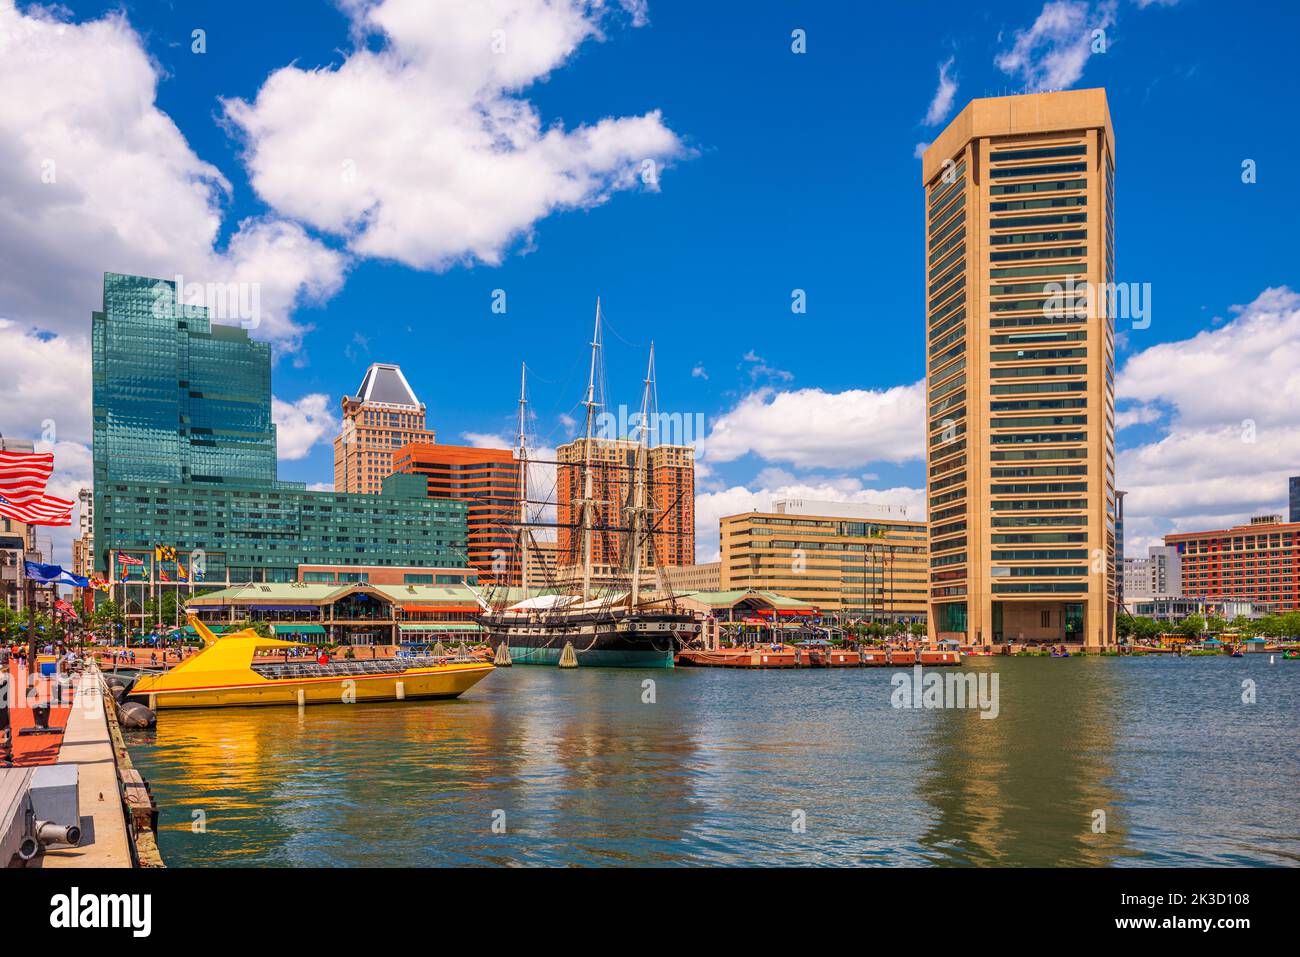 Baltimore, Maryland, USA Skyline on the Inner Harbor in the daytime. Stock Photo